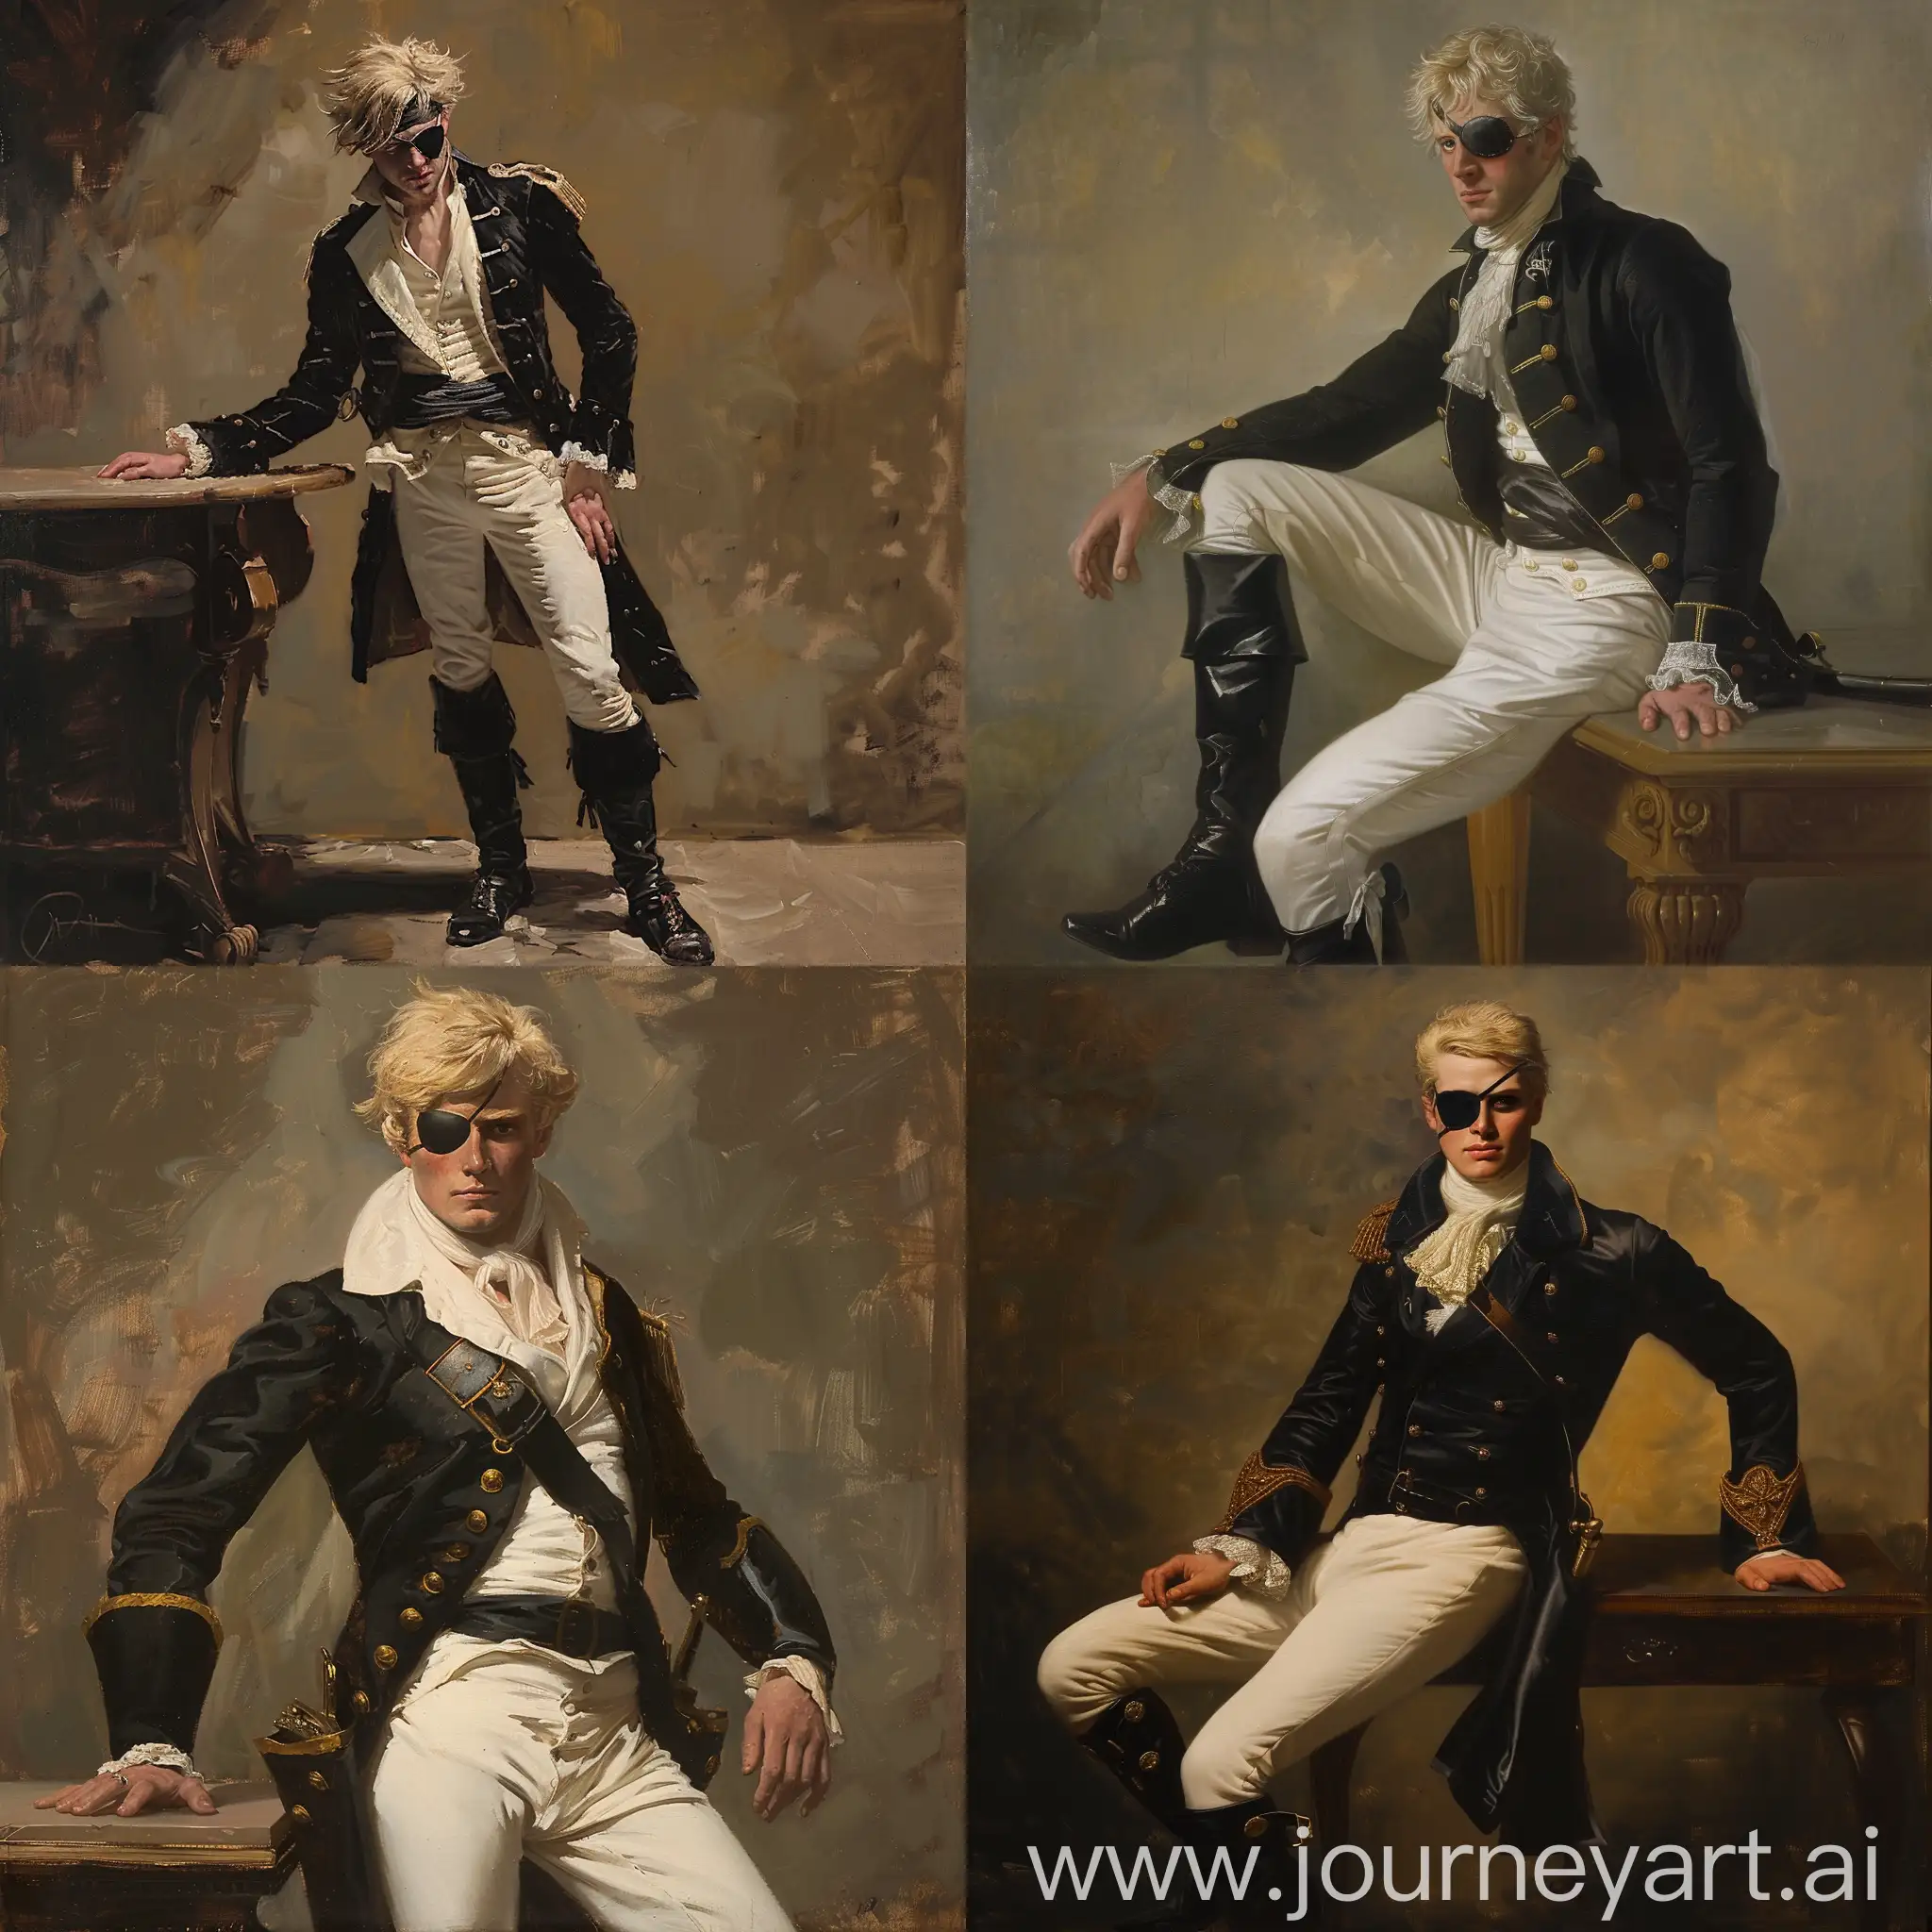 Napoleonic Oil painting of a white blonde male figure with a left eyepatch and a black tailcoat with tall black napoleonic boots and white pants, leading his right arm on the table, looking to his left, in the style of Gilbert Stuart